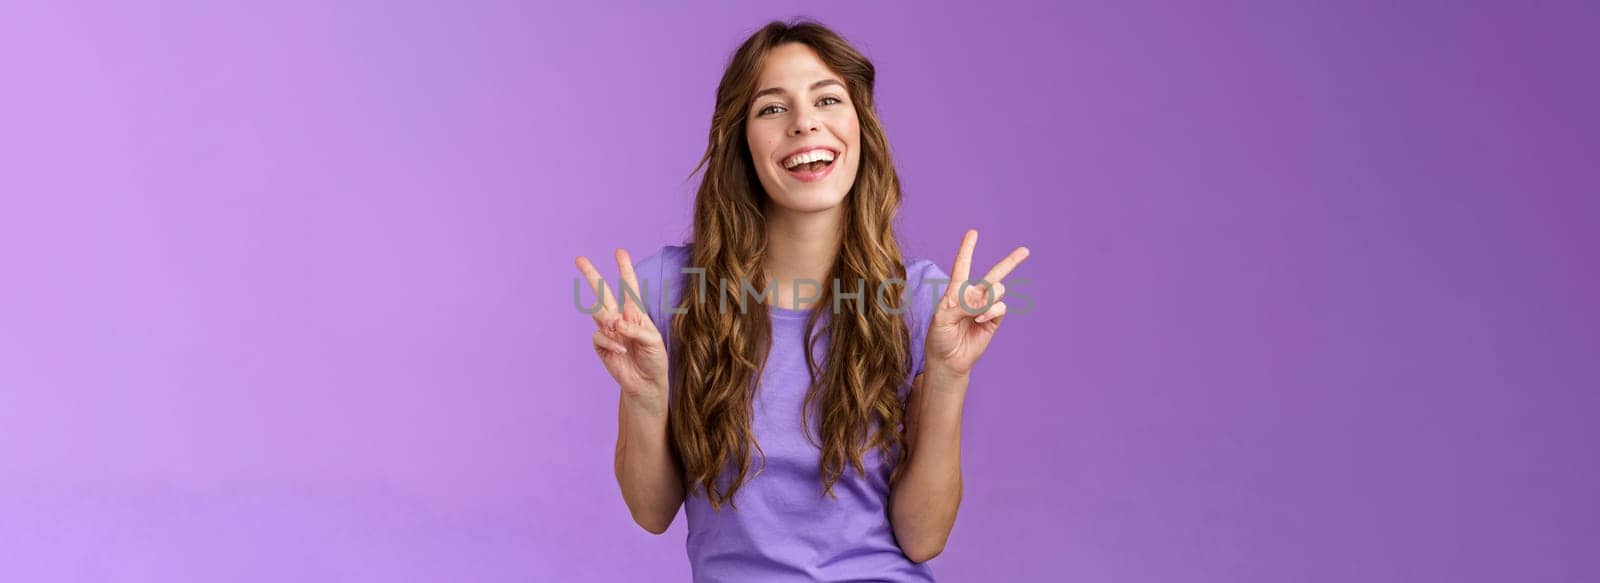 Happy cheerful attractive female express positive upbeat attitude show peace victory signs smiling broadly toothy adorable grin having fun enjoy summer holidays posing photograph purple wall. Lifestyle.